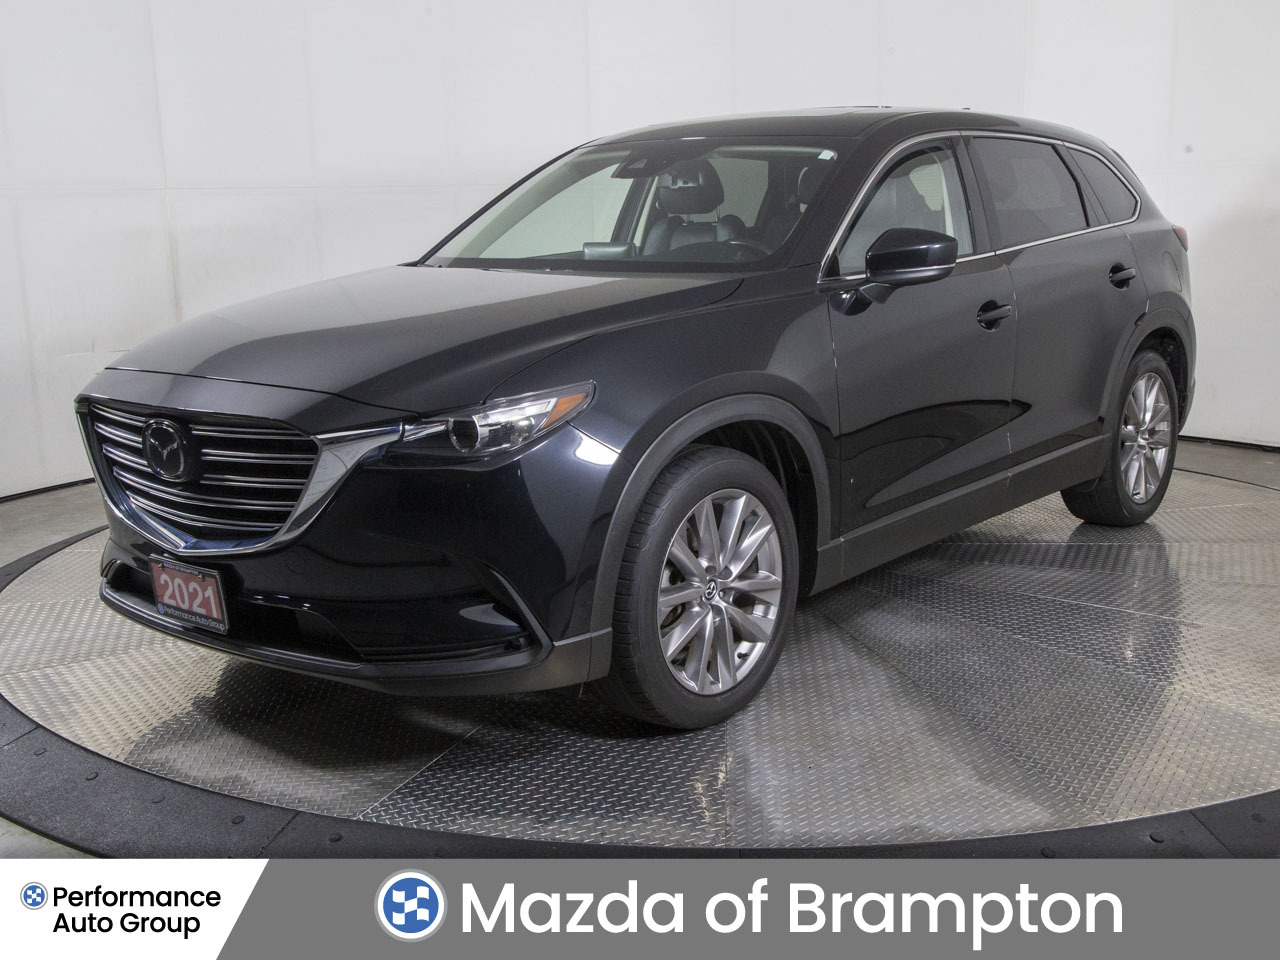 2021 Mazda CX-9 GS-L AWD LEATHER 7 PASSENGER SUNROOF 1 OWNER